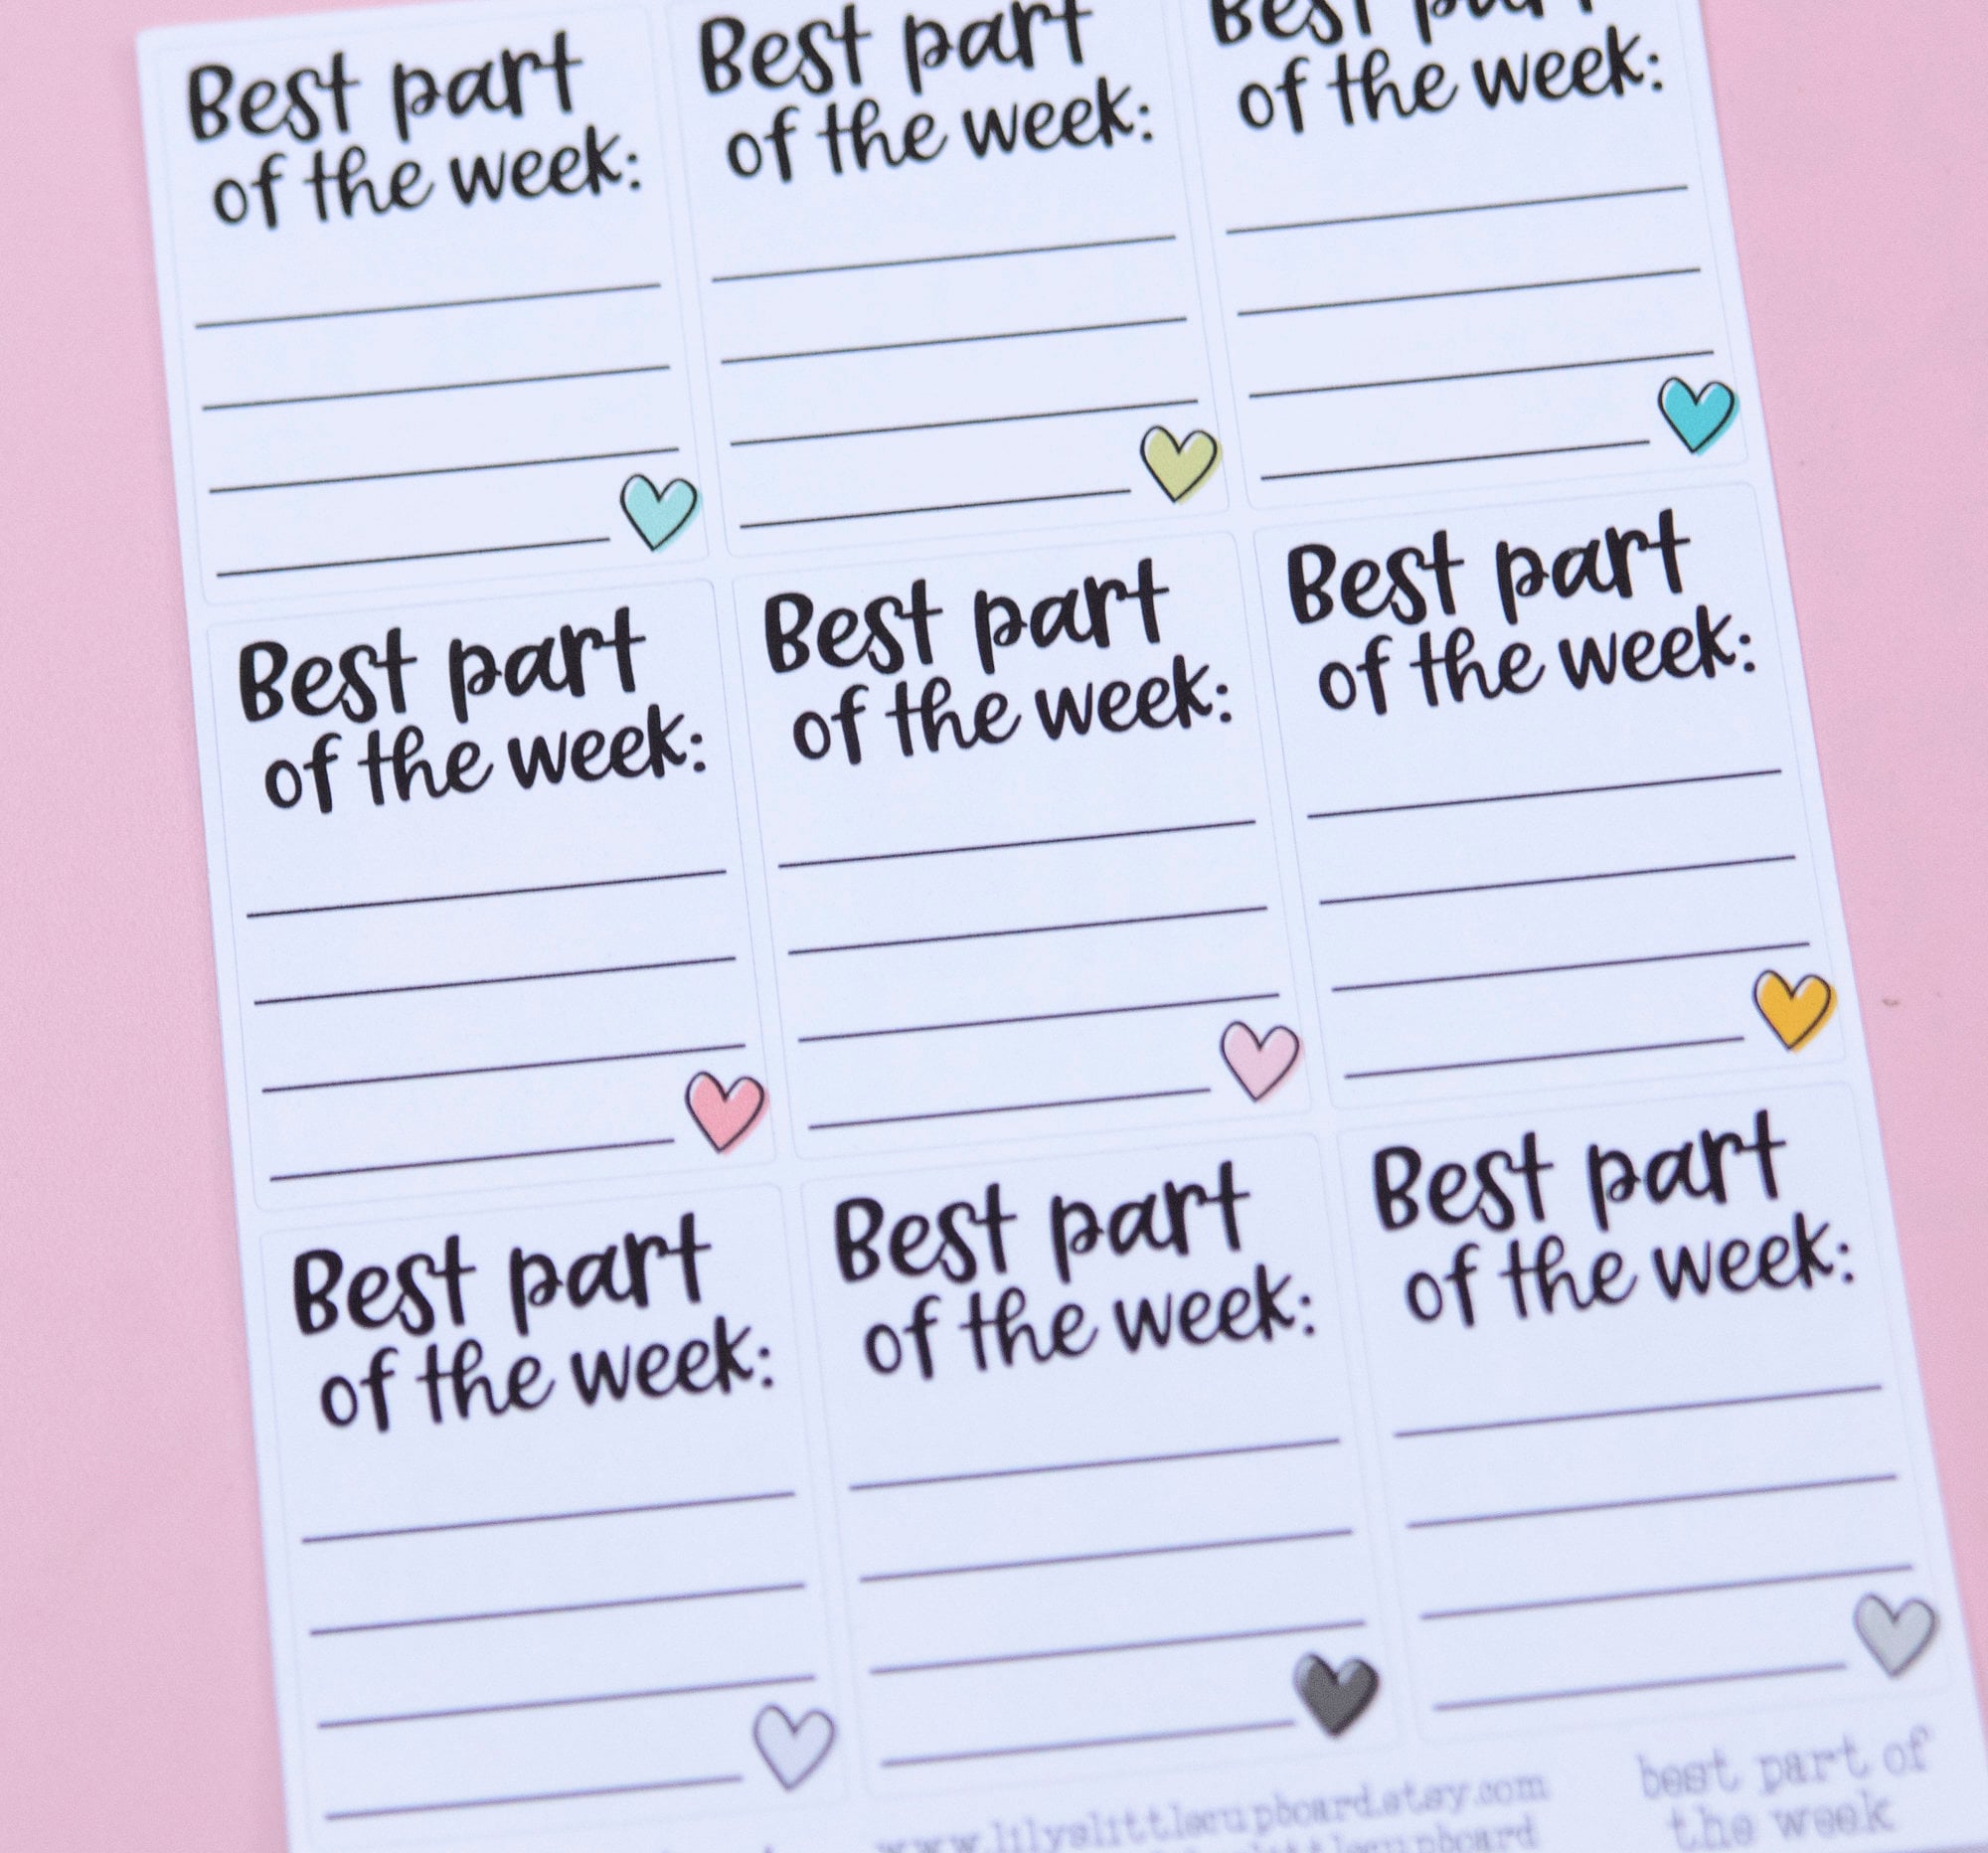 Days of the Week Stickers - Fabulously Planned